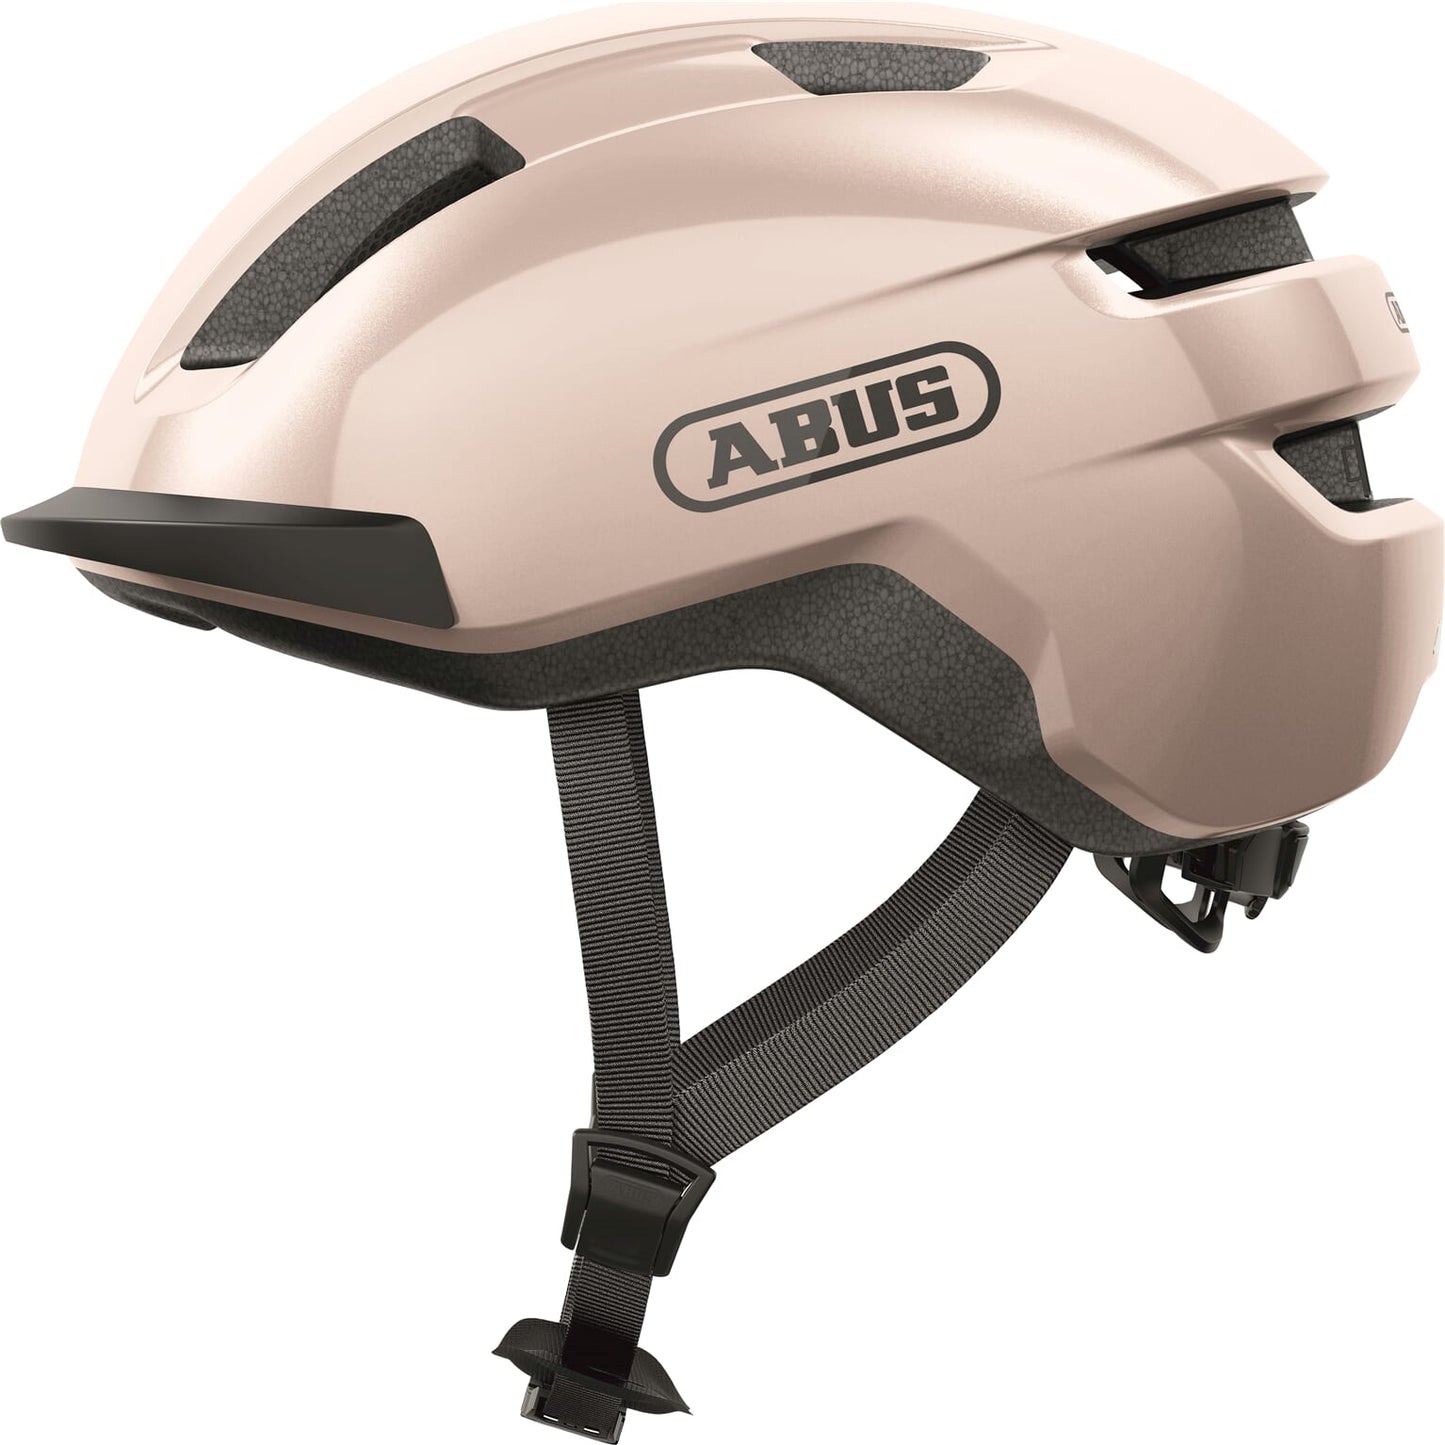 Abus Helm Purl-Y champagne gold S 51-55cm